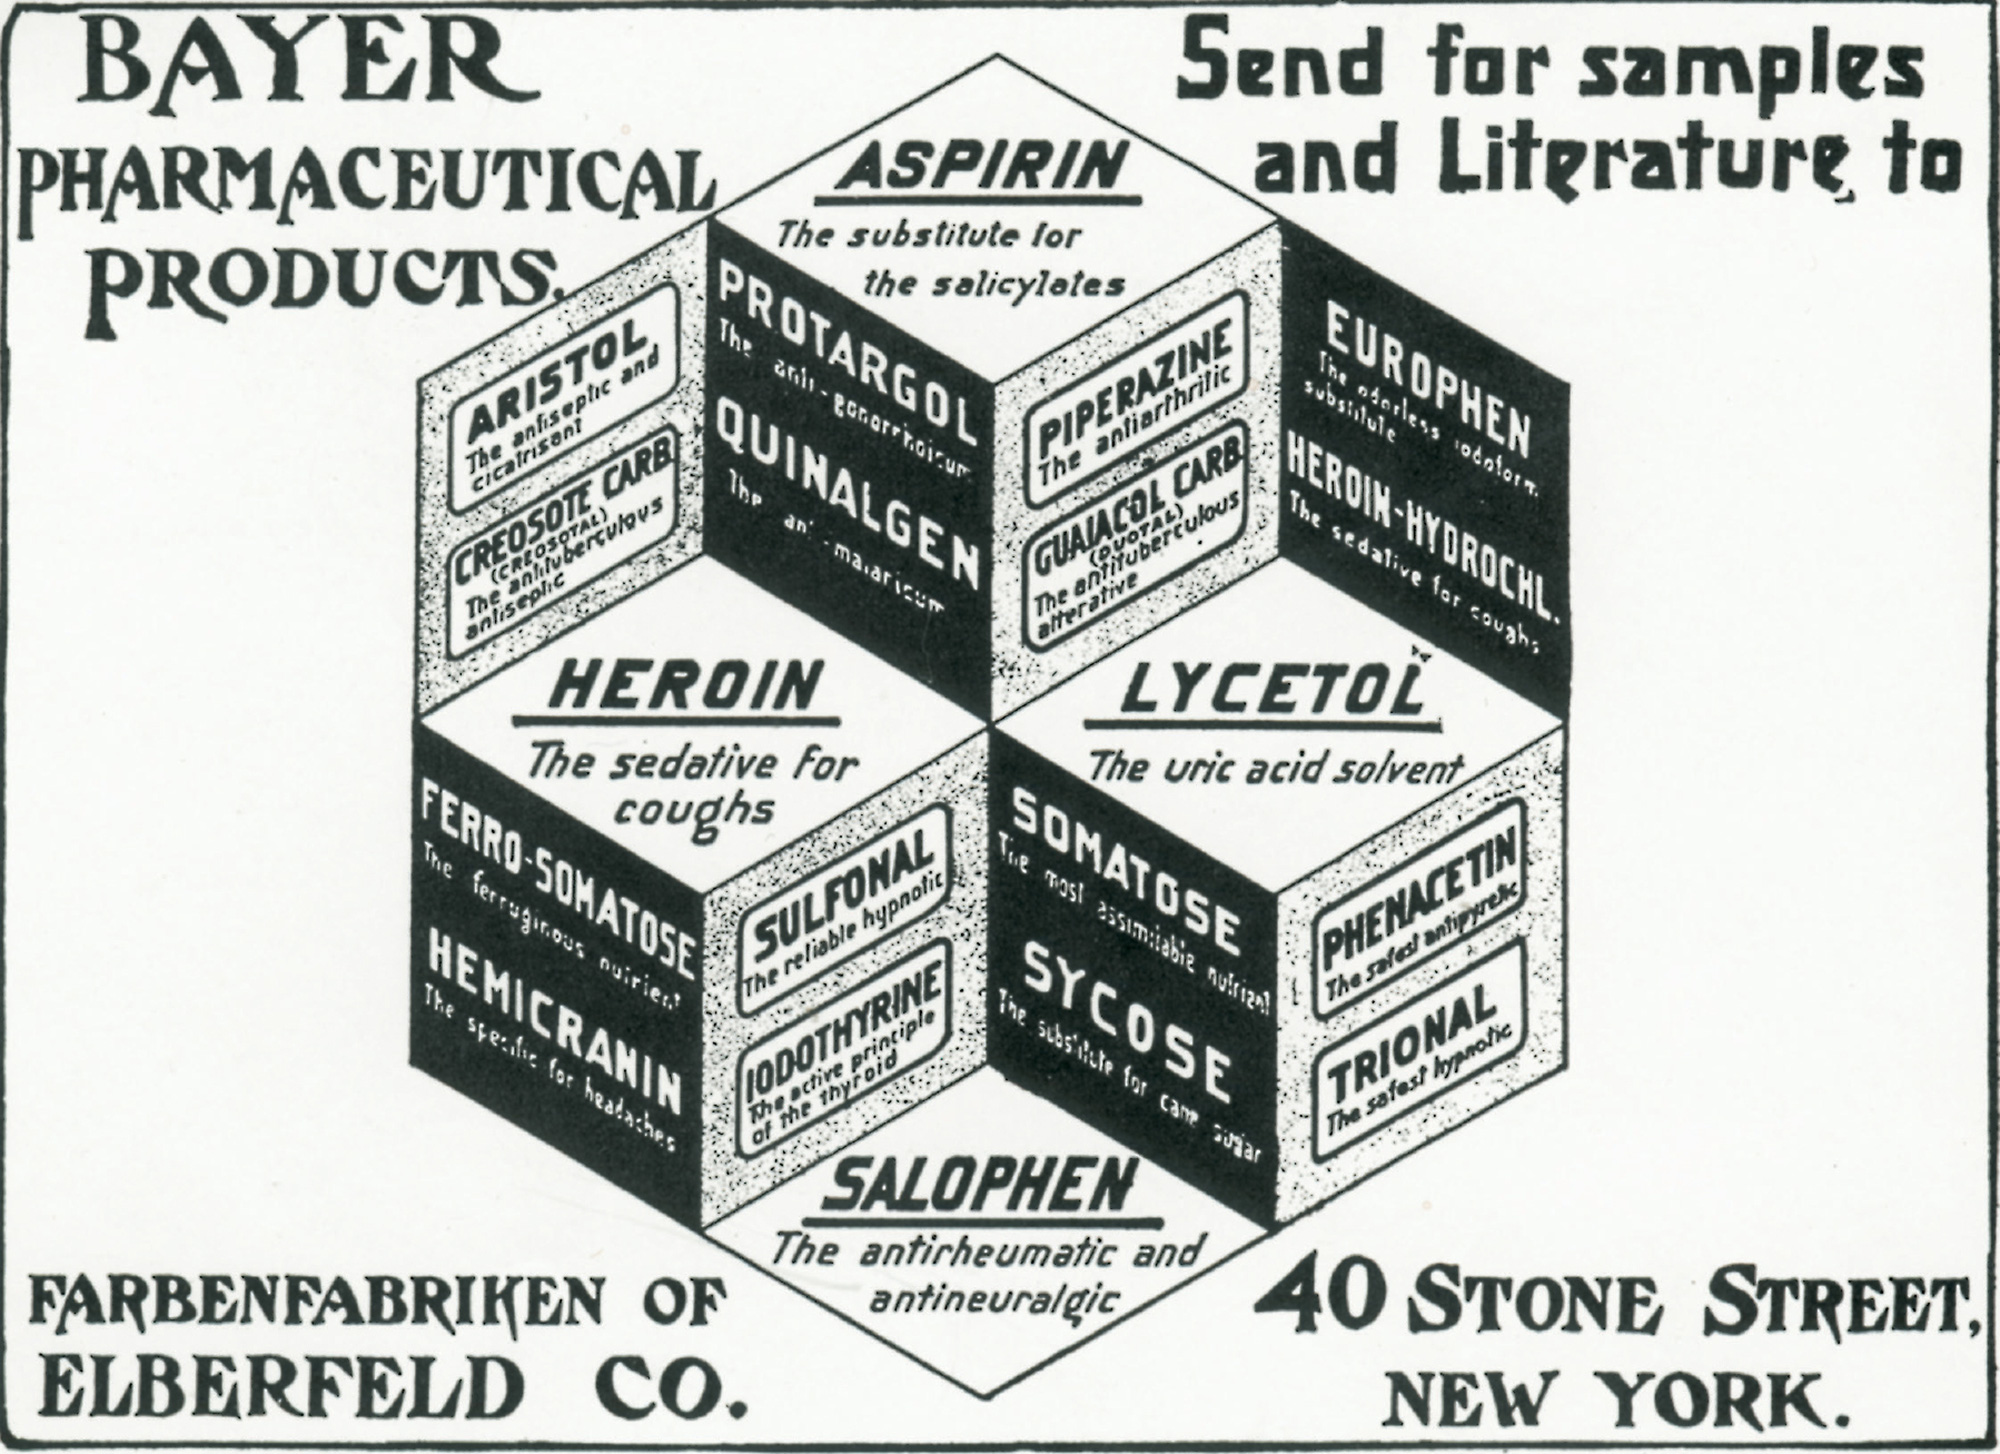 Promotional leaflet sent by Bayer to physicians. Aspirin and heroin were synthesized within two weeks of each other by Bayer’s Felix Hoffman in August 1897. Heroin was initiallly marketed to suppress coughs and to relieve the pain of childbirth. It was banned in most countries in the 1930s.